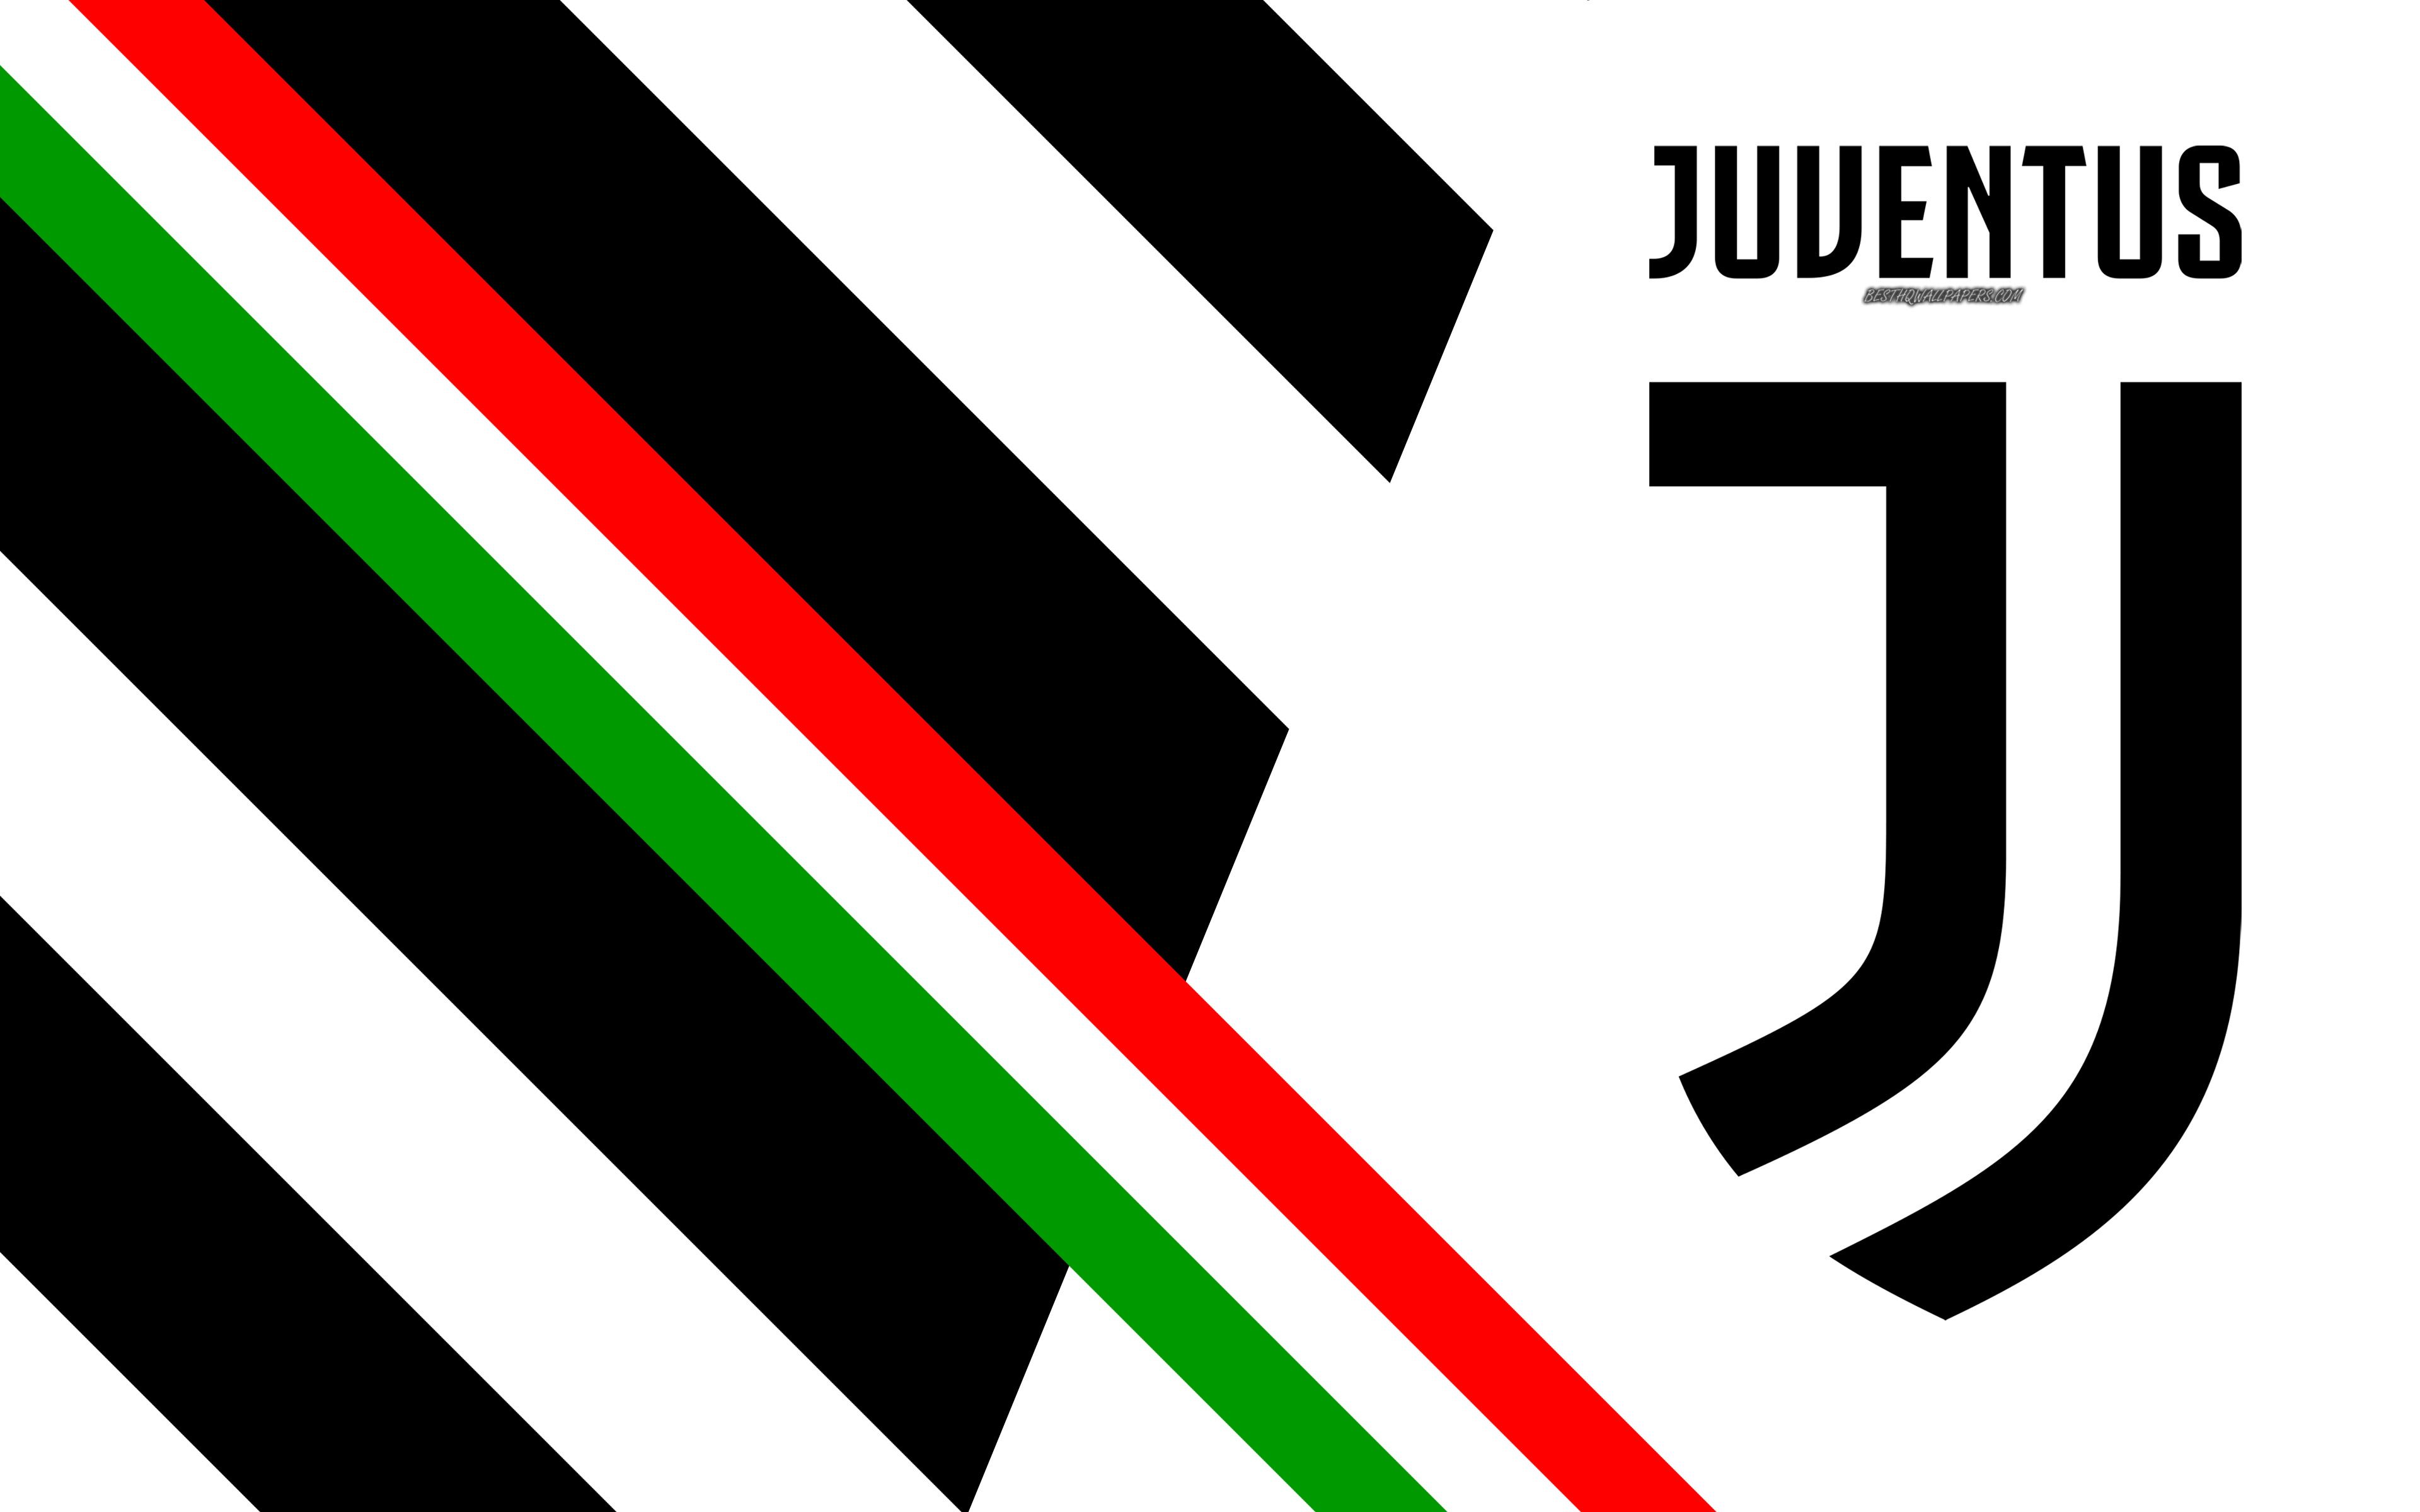 Juventus FC, 4k, Italian football club, new logo, abstraction, white black background, new emblem, Serie A, Italy, Turin, Flag of Italy, football, Juve